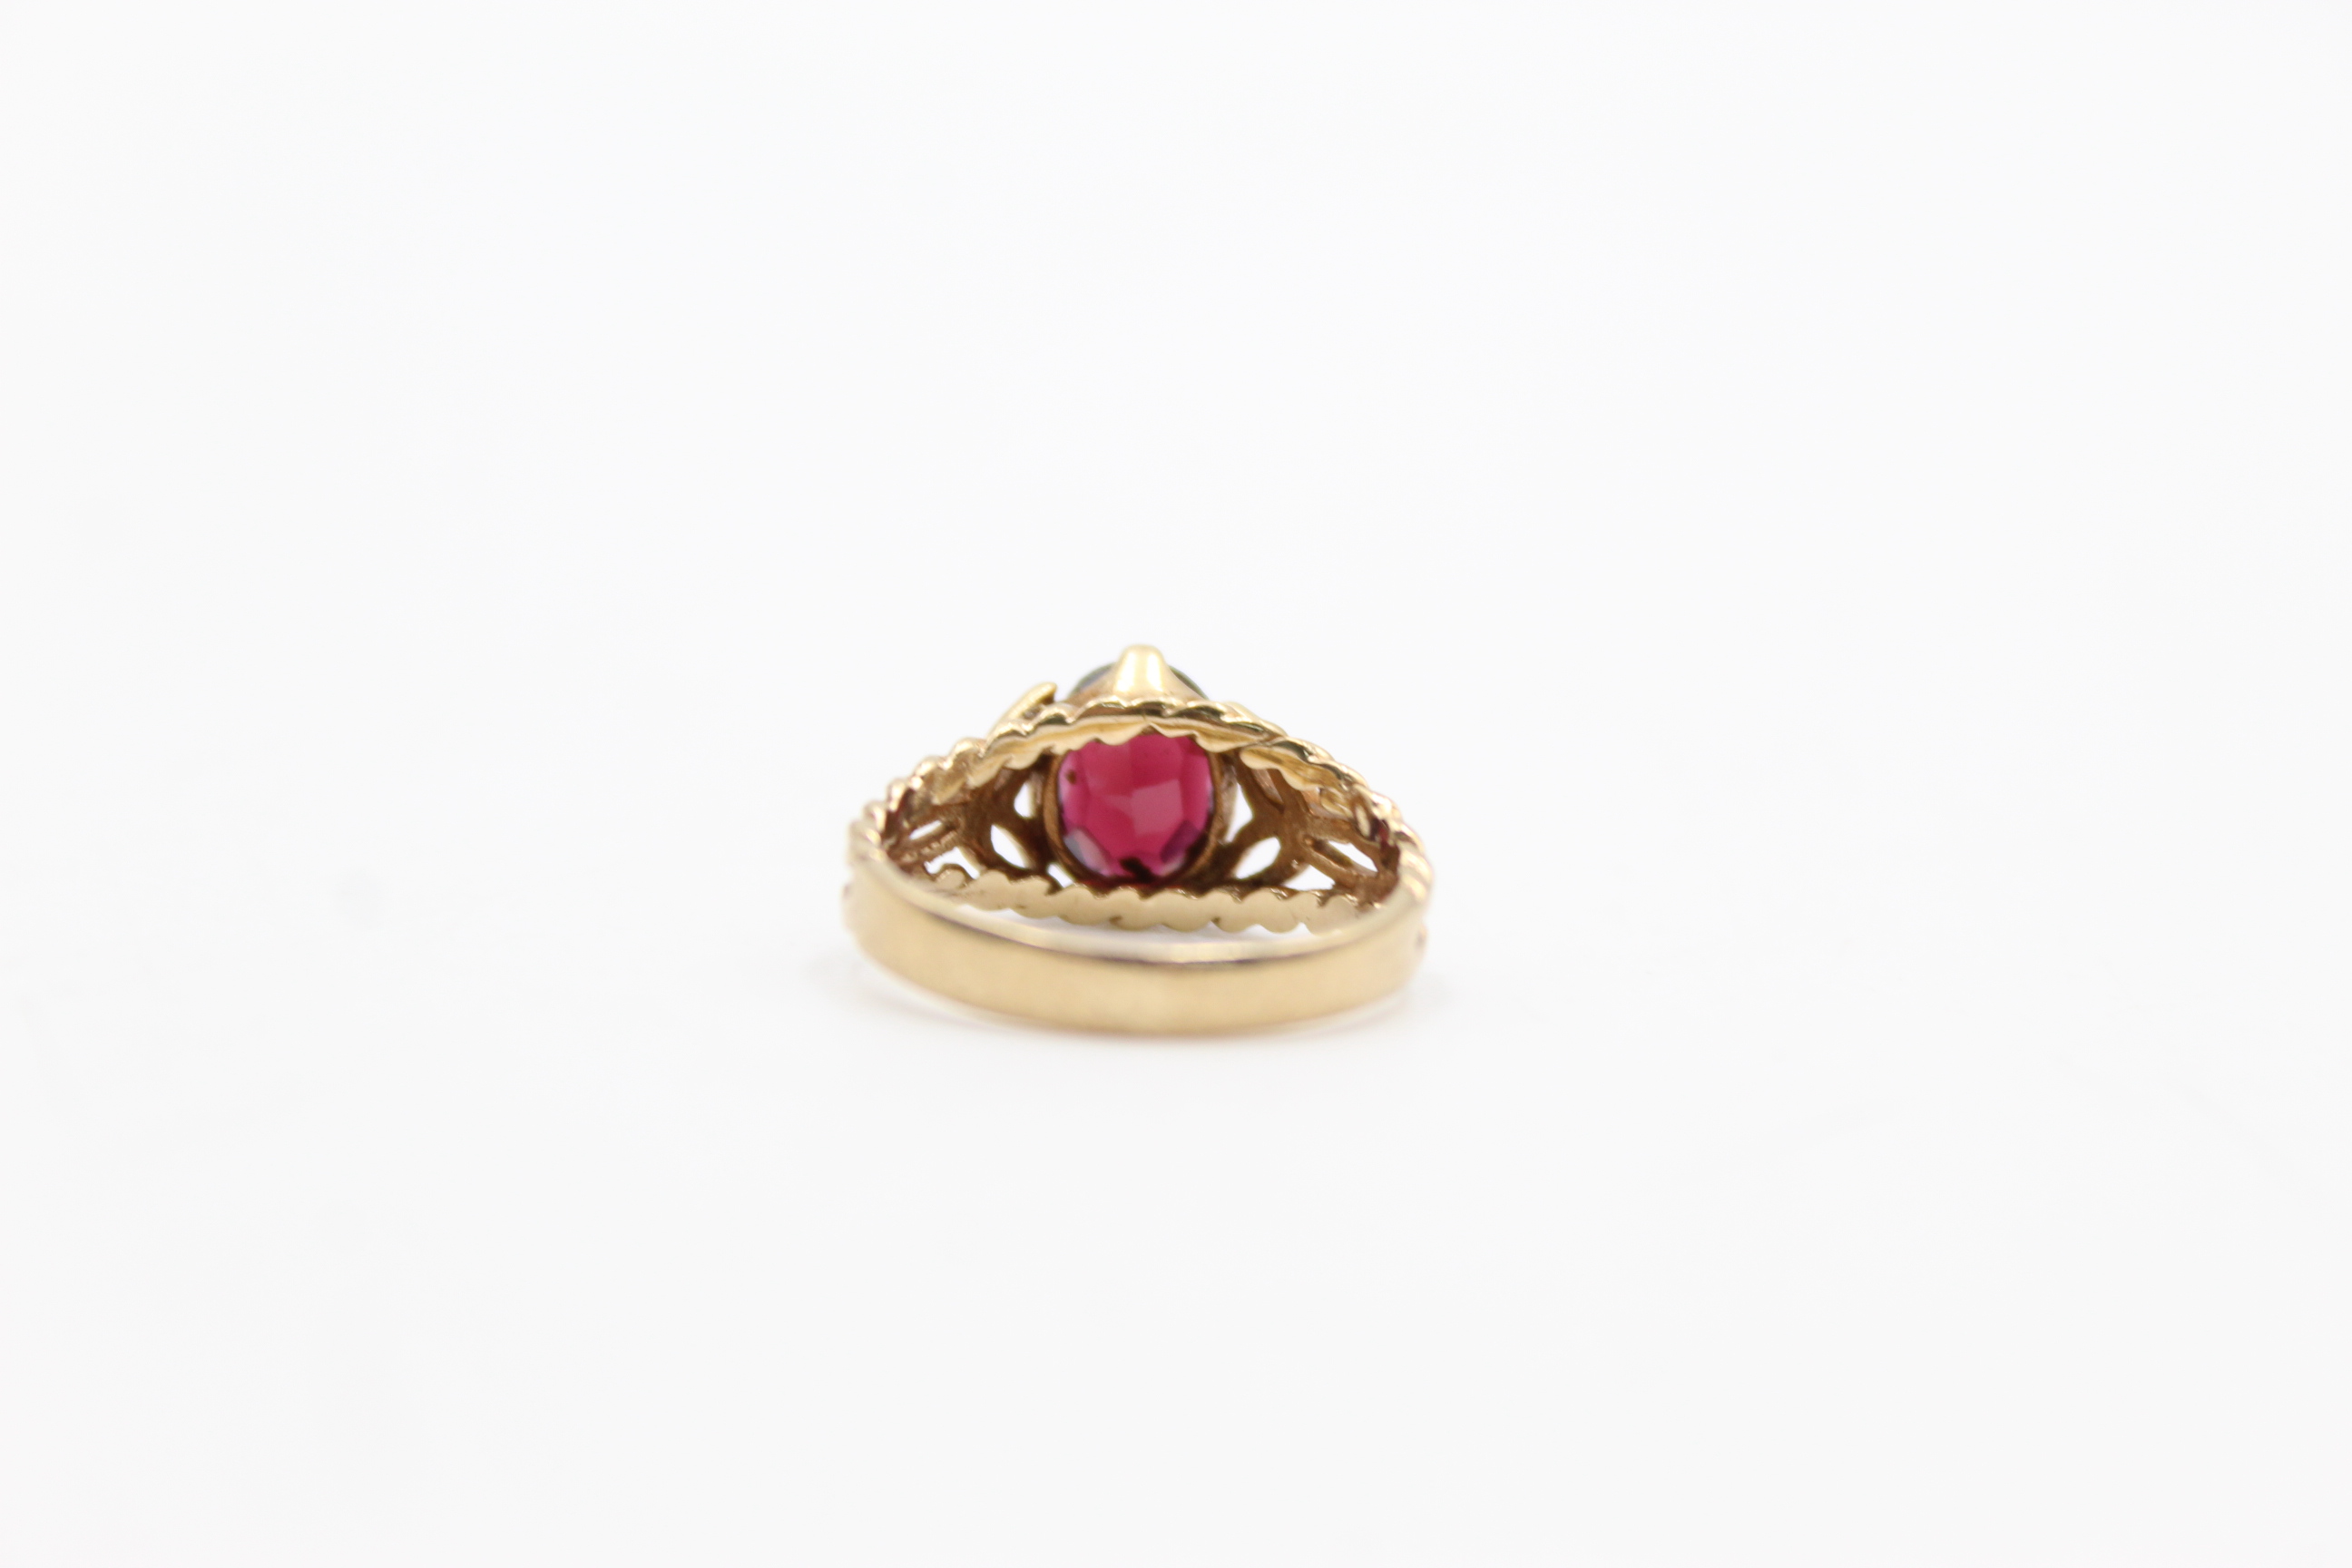 9ct gold garnet solitaire cutwork band ring (2.3g) - Image 4 of 6